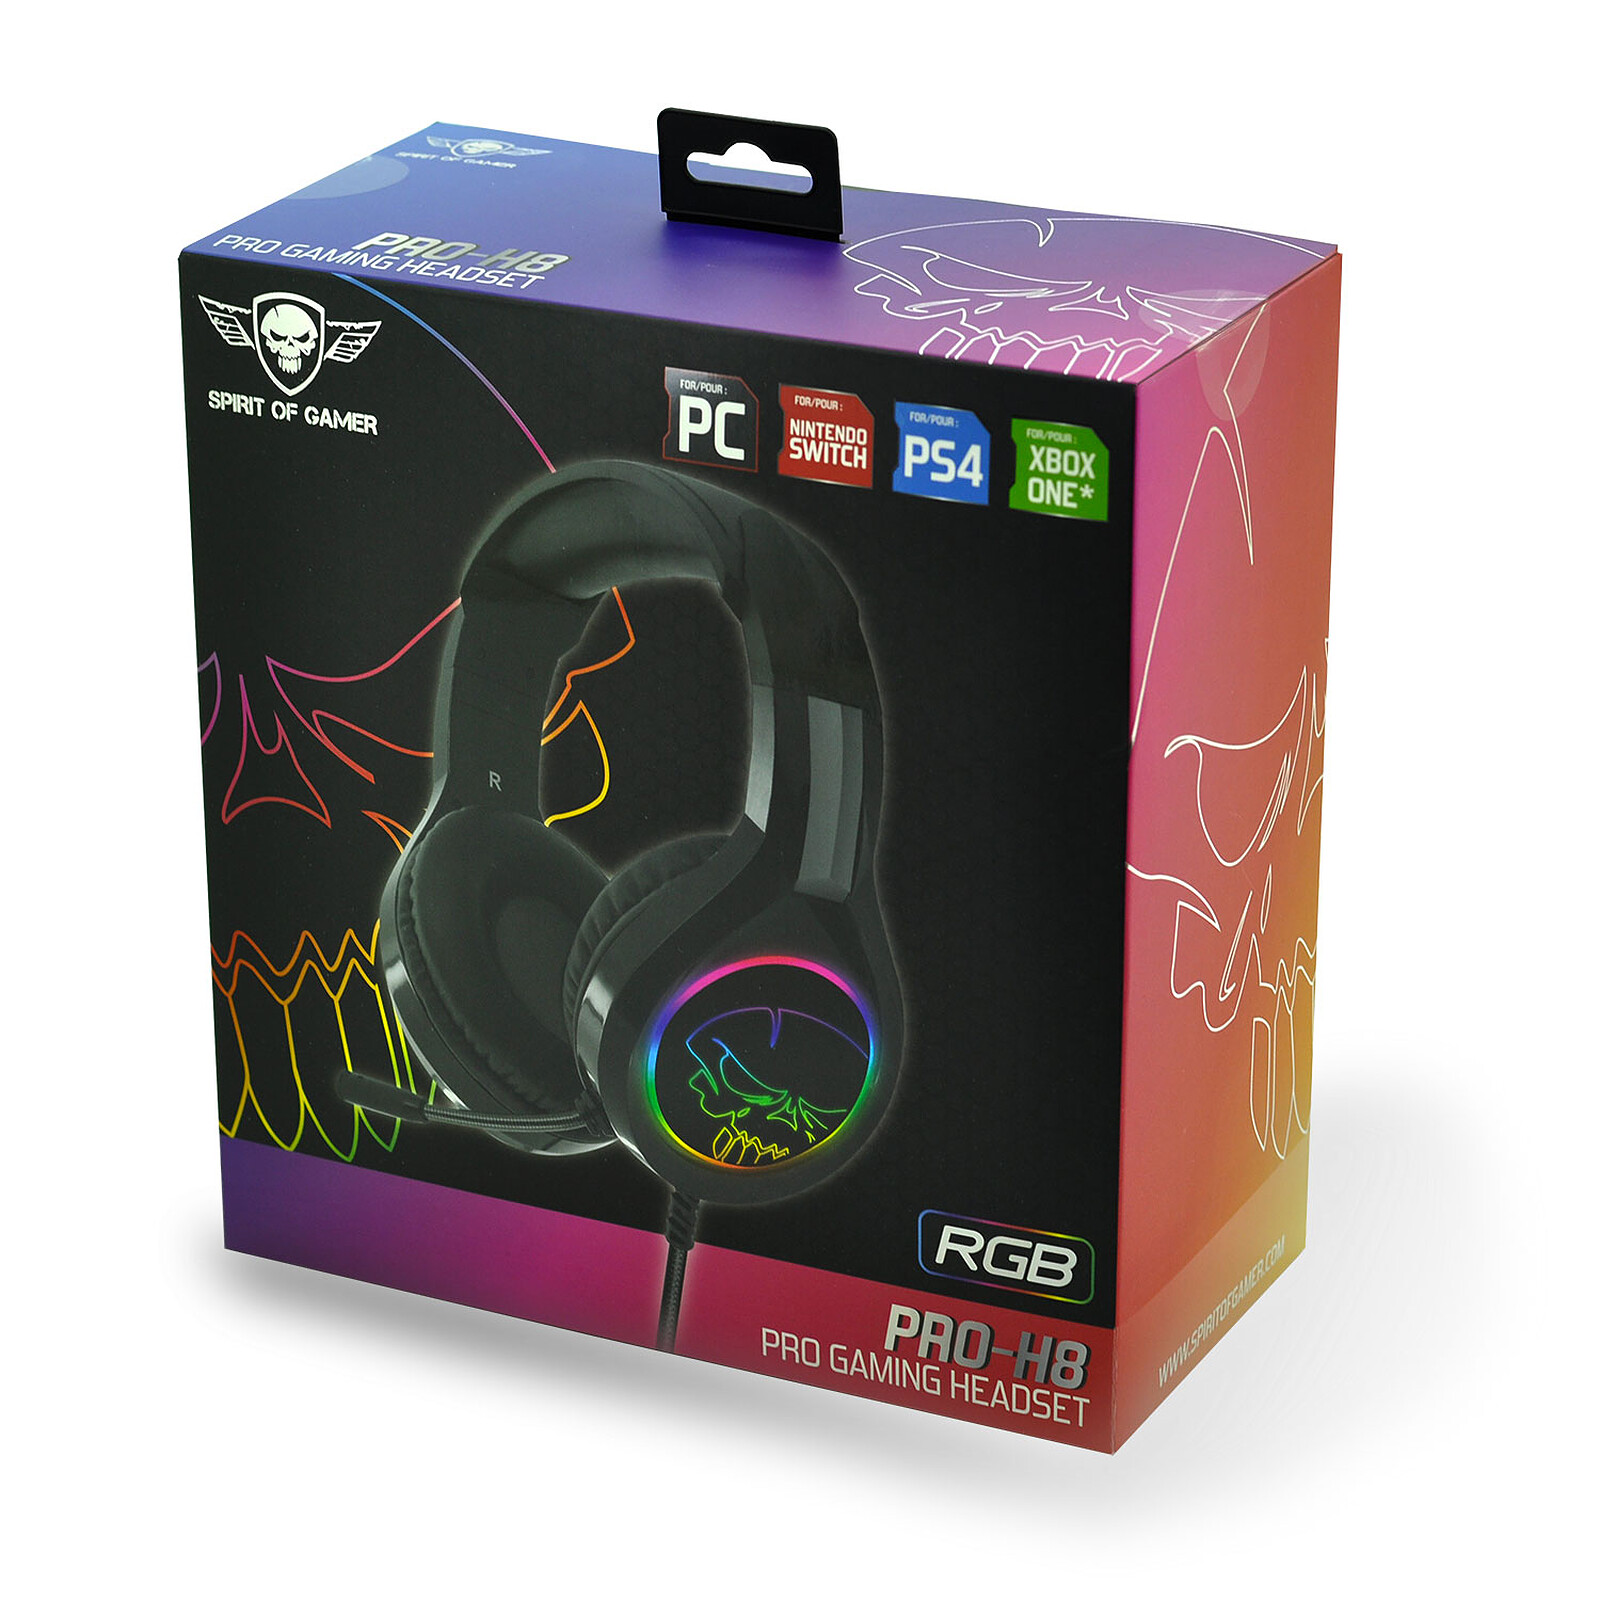 Casque-micro - son surround virtuel 7.1 - microphone omnidirectionnel - rgb  - compatible pc/ps4 SPIRIT OF GAMER Pas Cher 